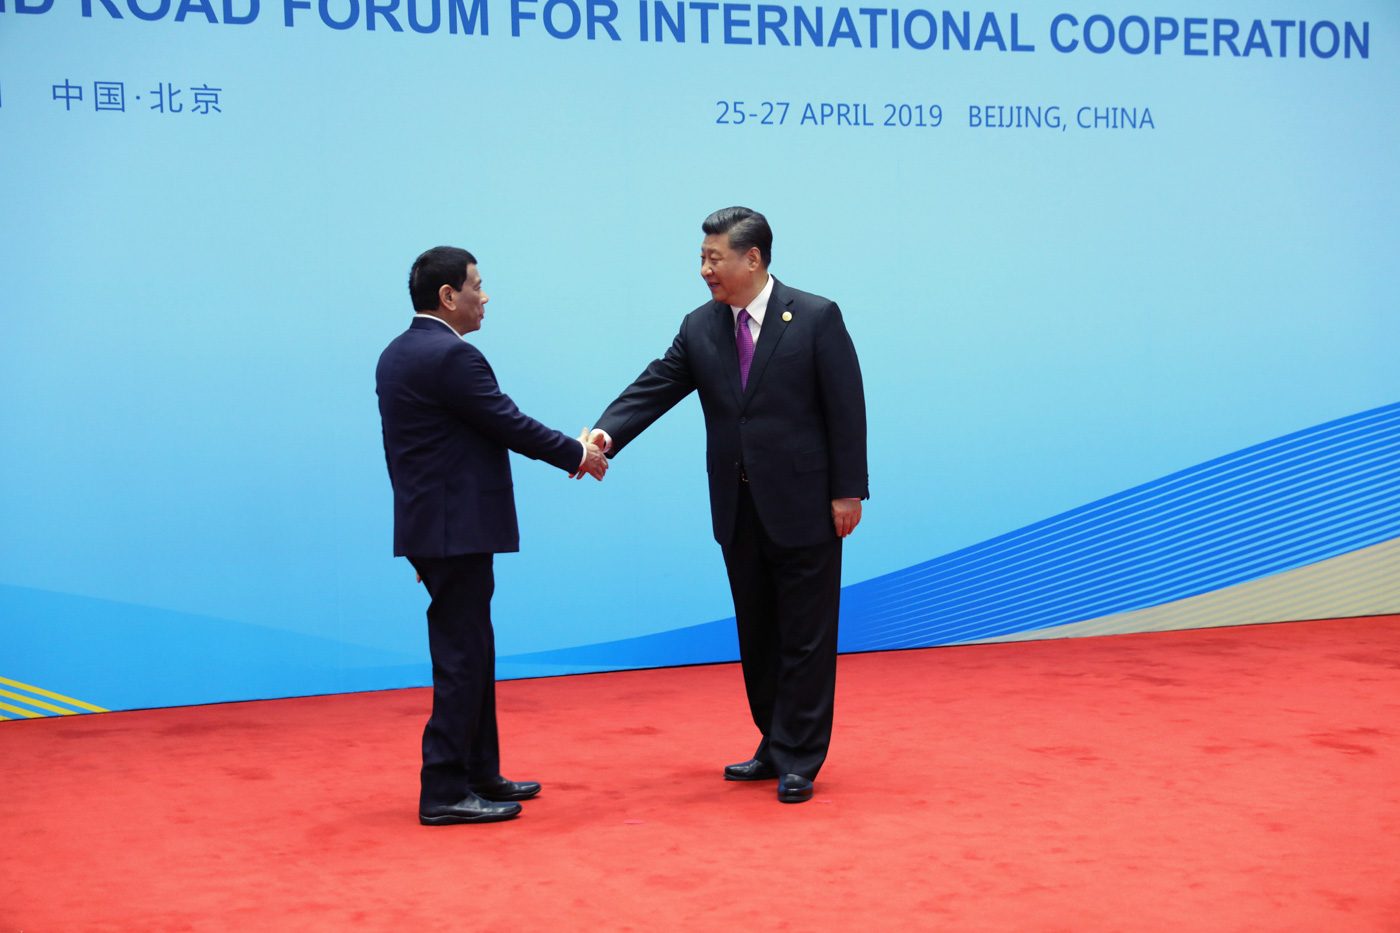 GOOD FRIENDS. President Rodrigo Duterte receives a warm welcome from Chinese President Xi Jinping before the Leaders' Roundtable Discussion of the 2nd Belt and Road Forum for International Cooperation at the Yanqi Lake International Convention Center on April 27, 2019. Malacañang photo 